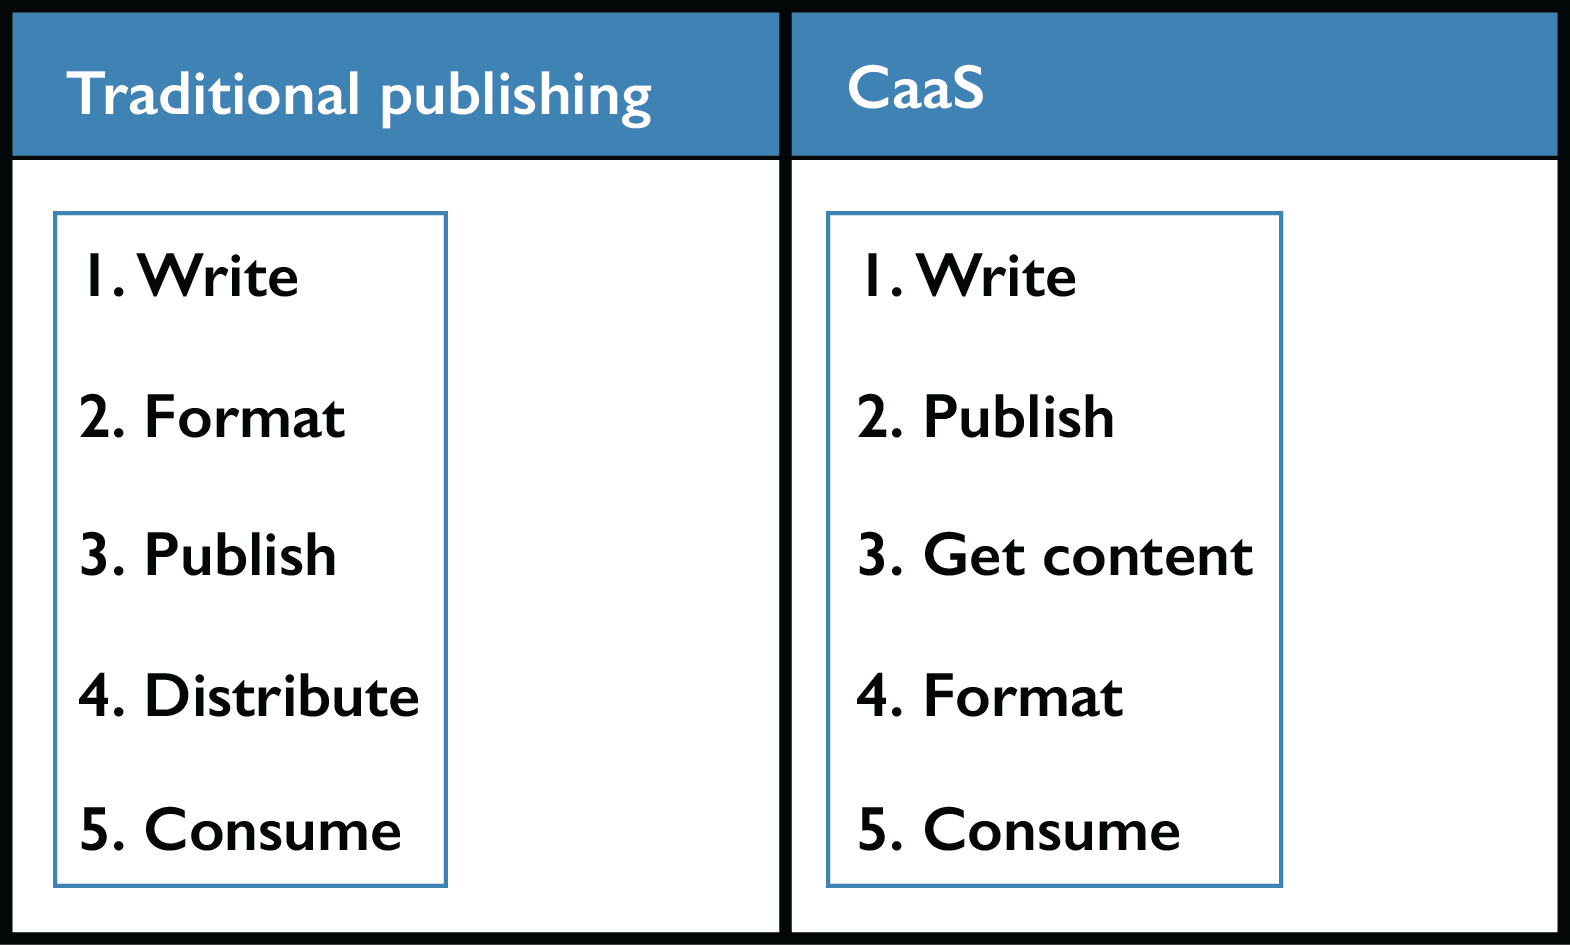 A table showing that traditional publishing includes write, format, publish, distribute, and consume. A CaaS system includes write, publish, get content, format, consume.